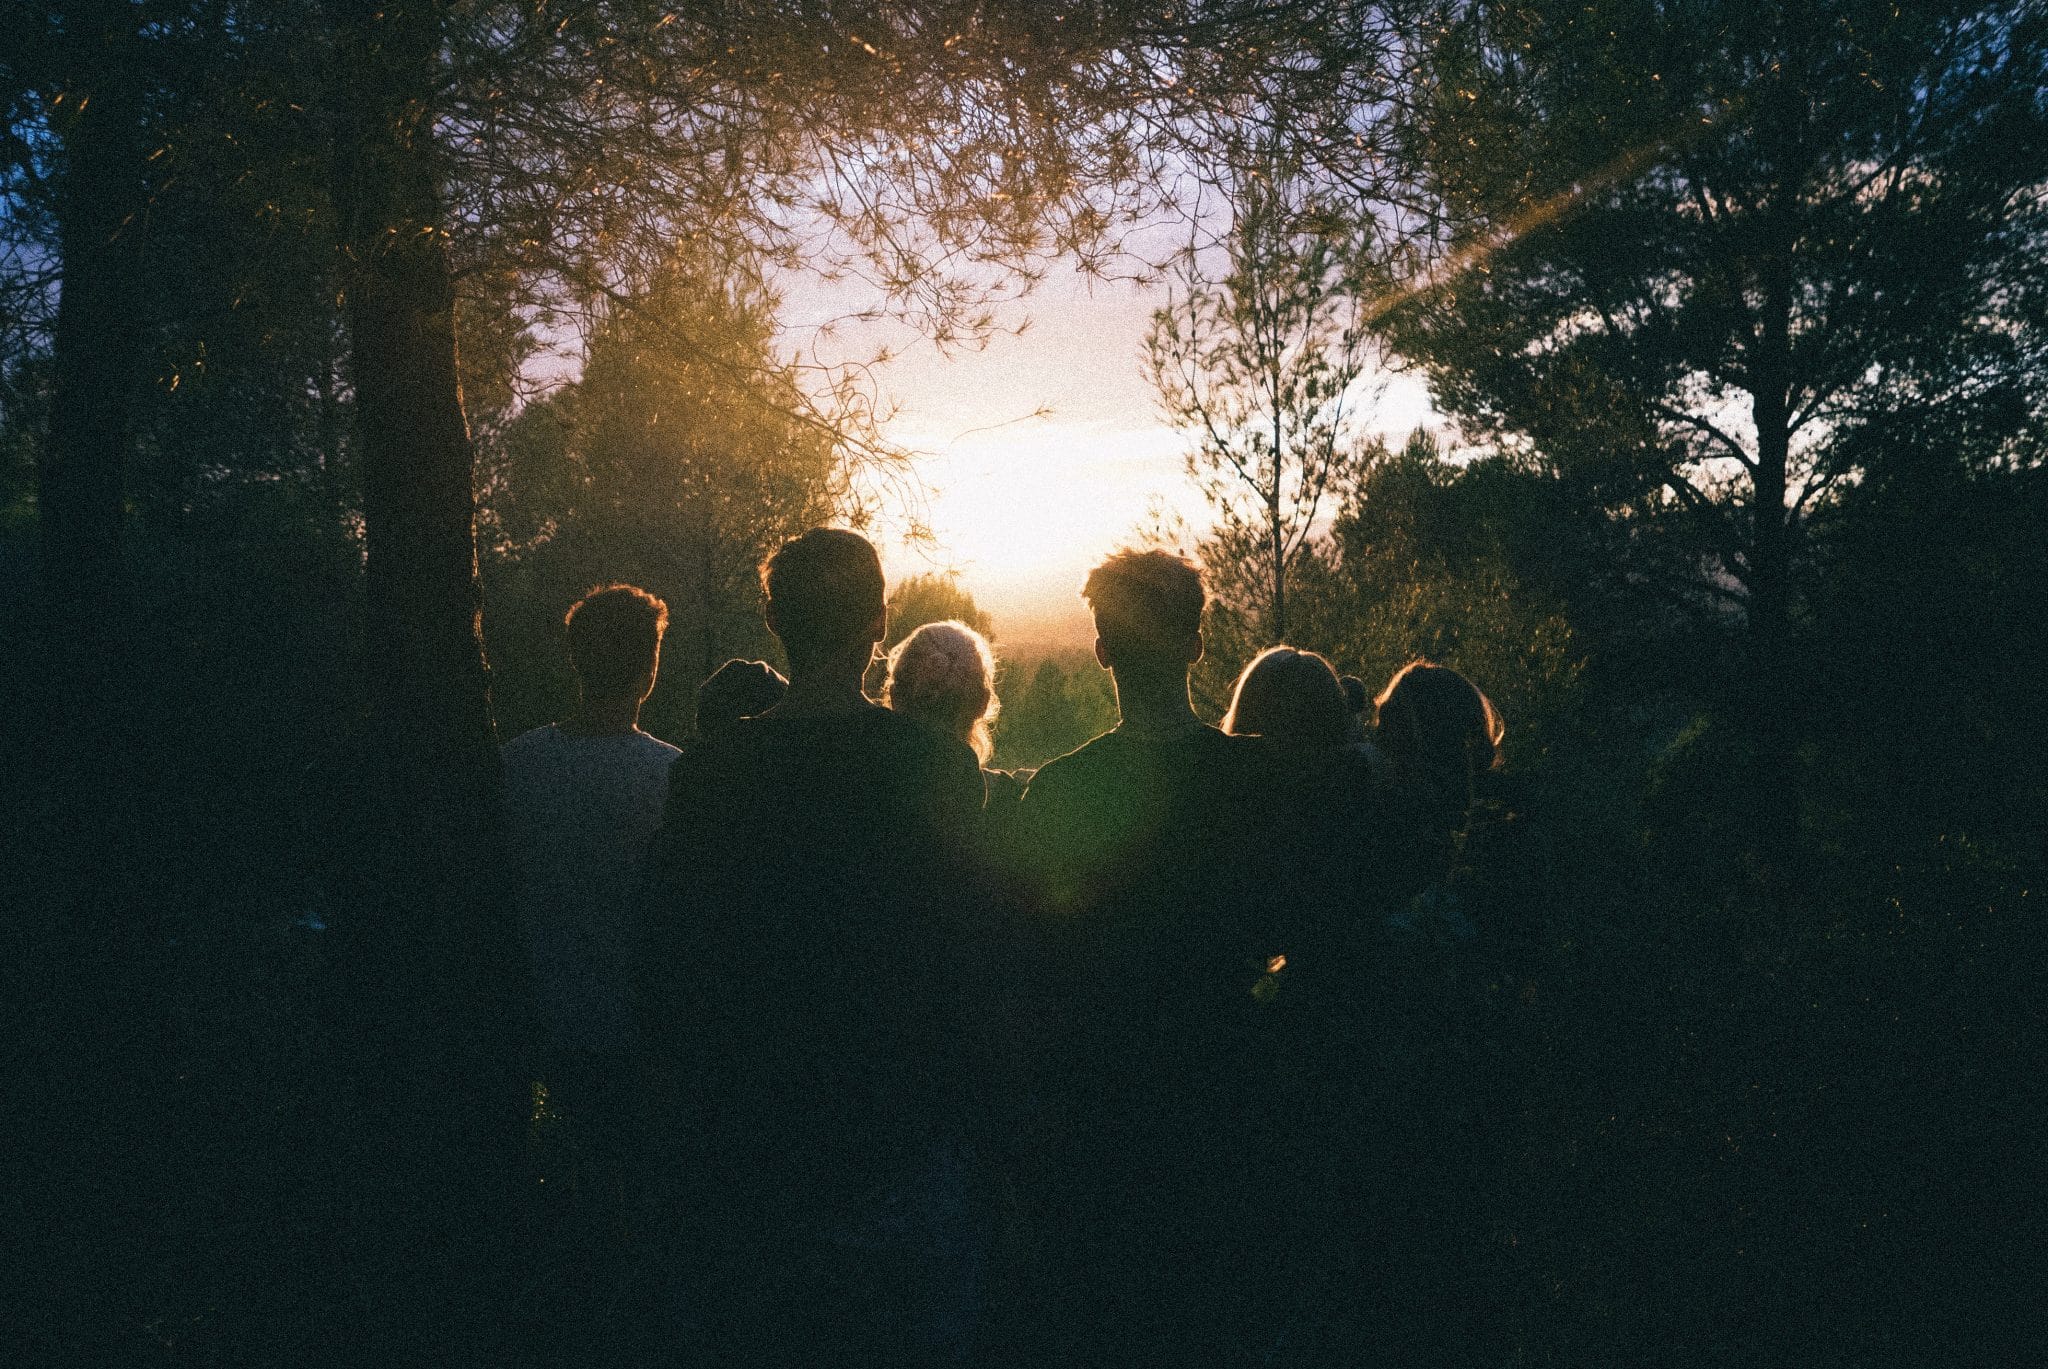 A community of people watching an awe-inspiring sunset together from a forest.